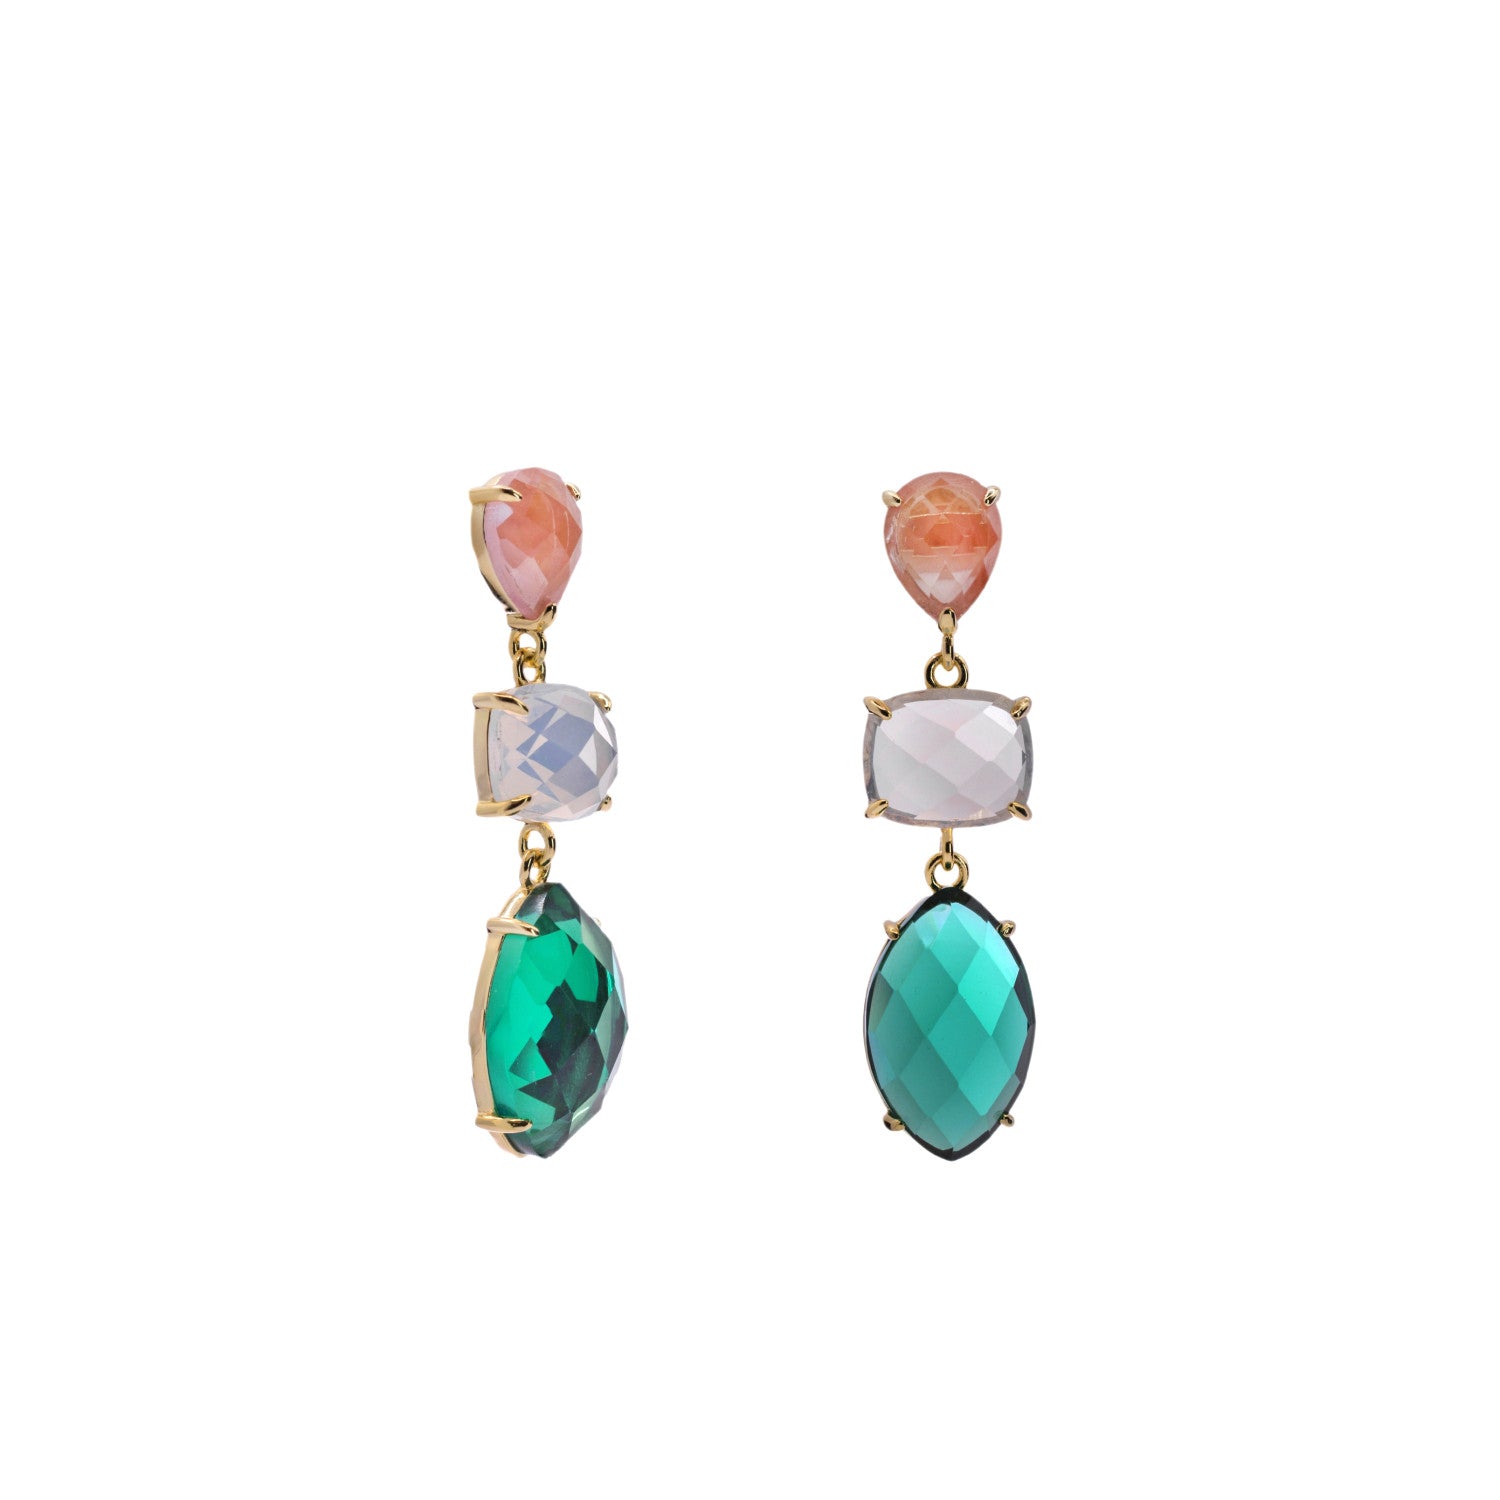 Earrings with long colored stones in turquoise tone